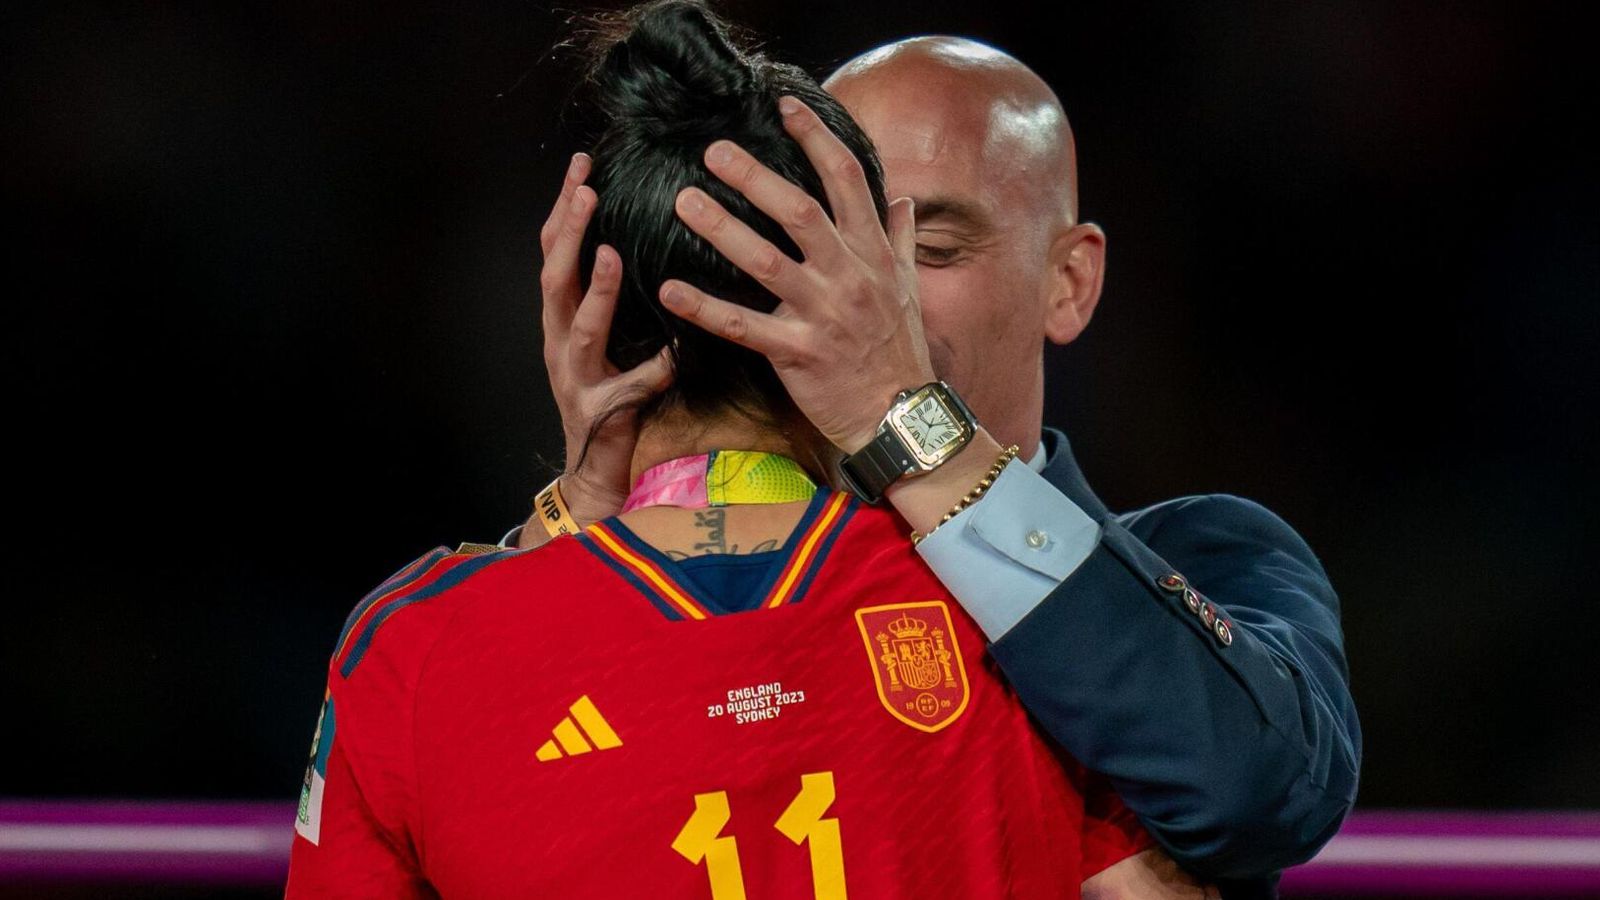 Spain’s FA president Luis Rubiales refuses to quit as he claims Women’s World Cup final kiss was ‘mutual’ | World News